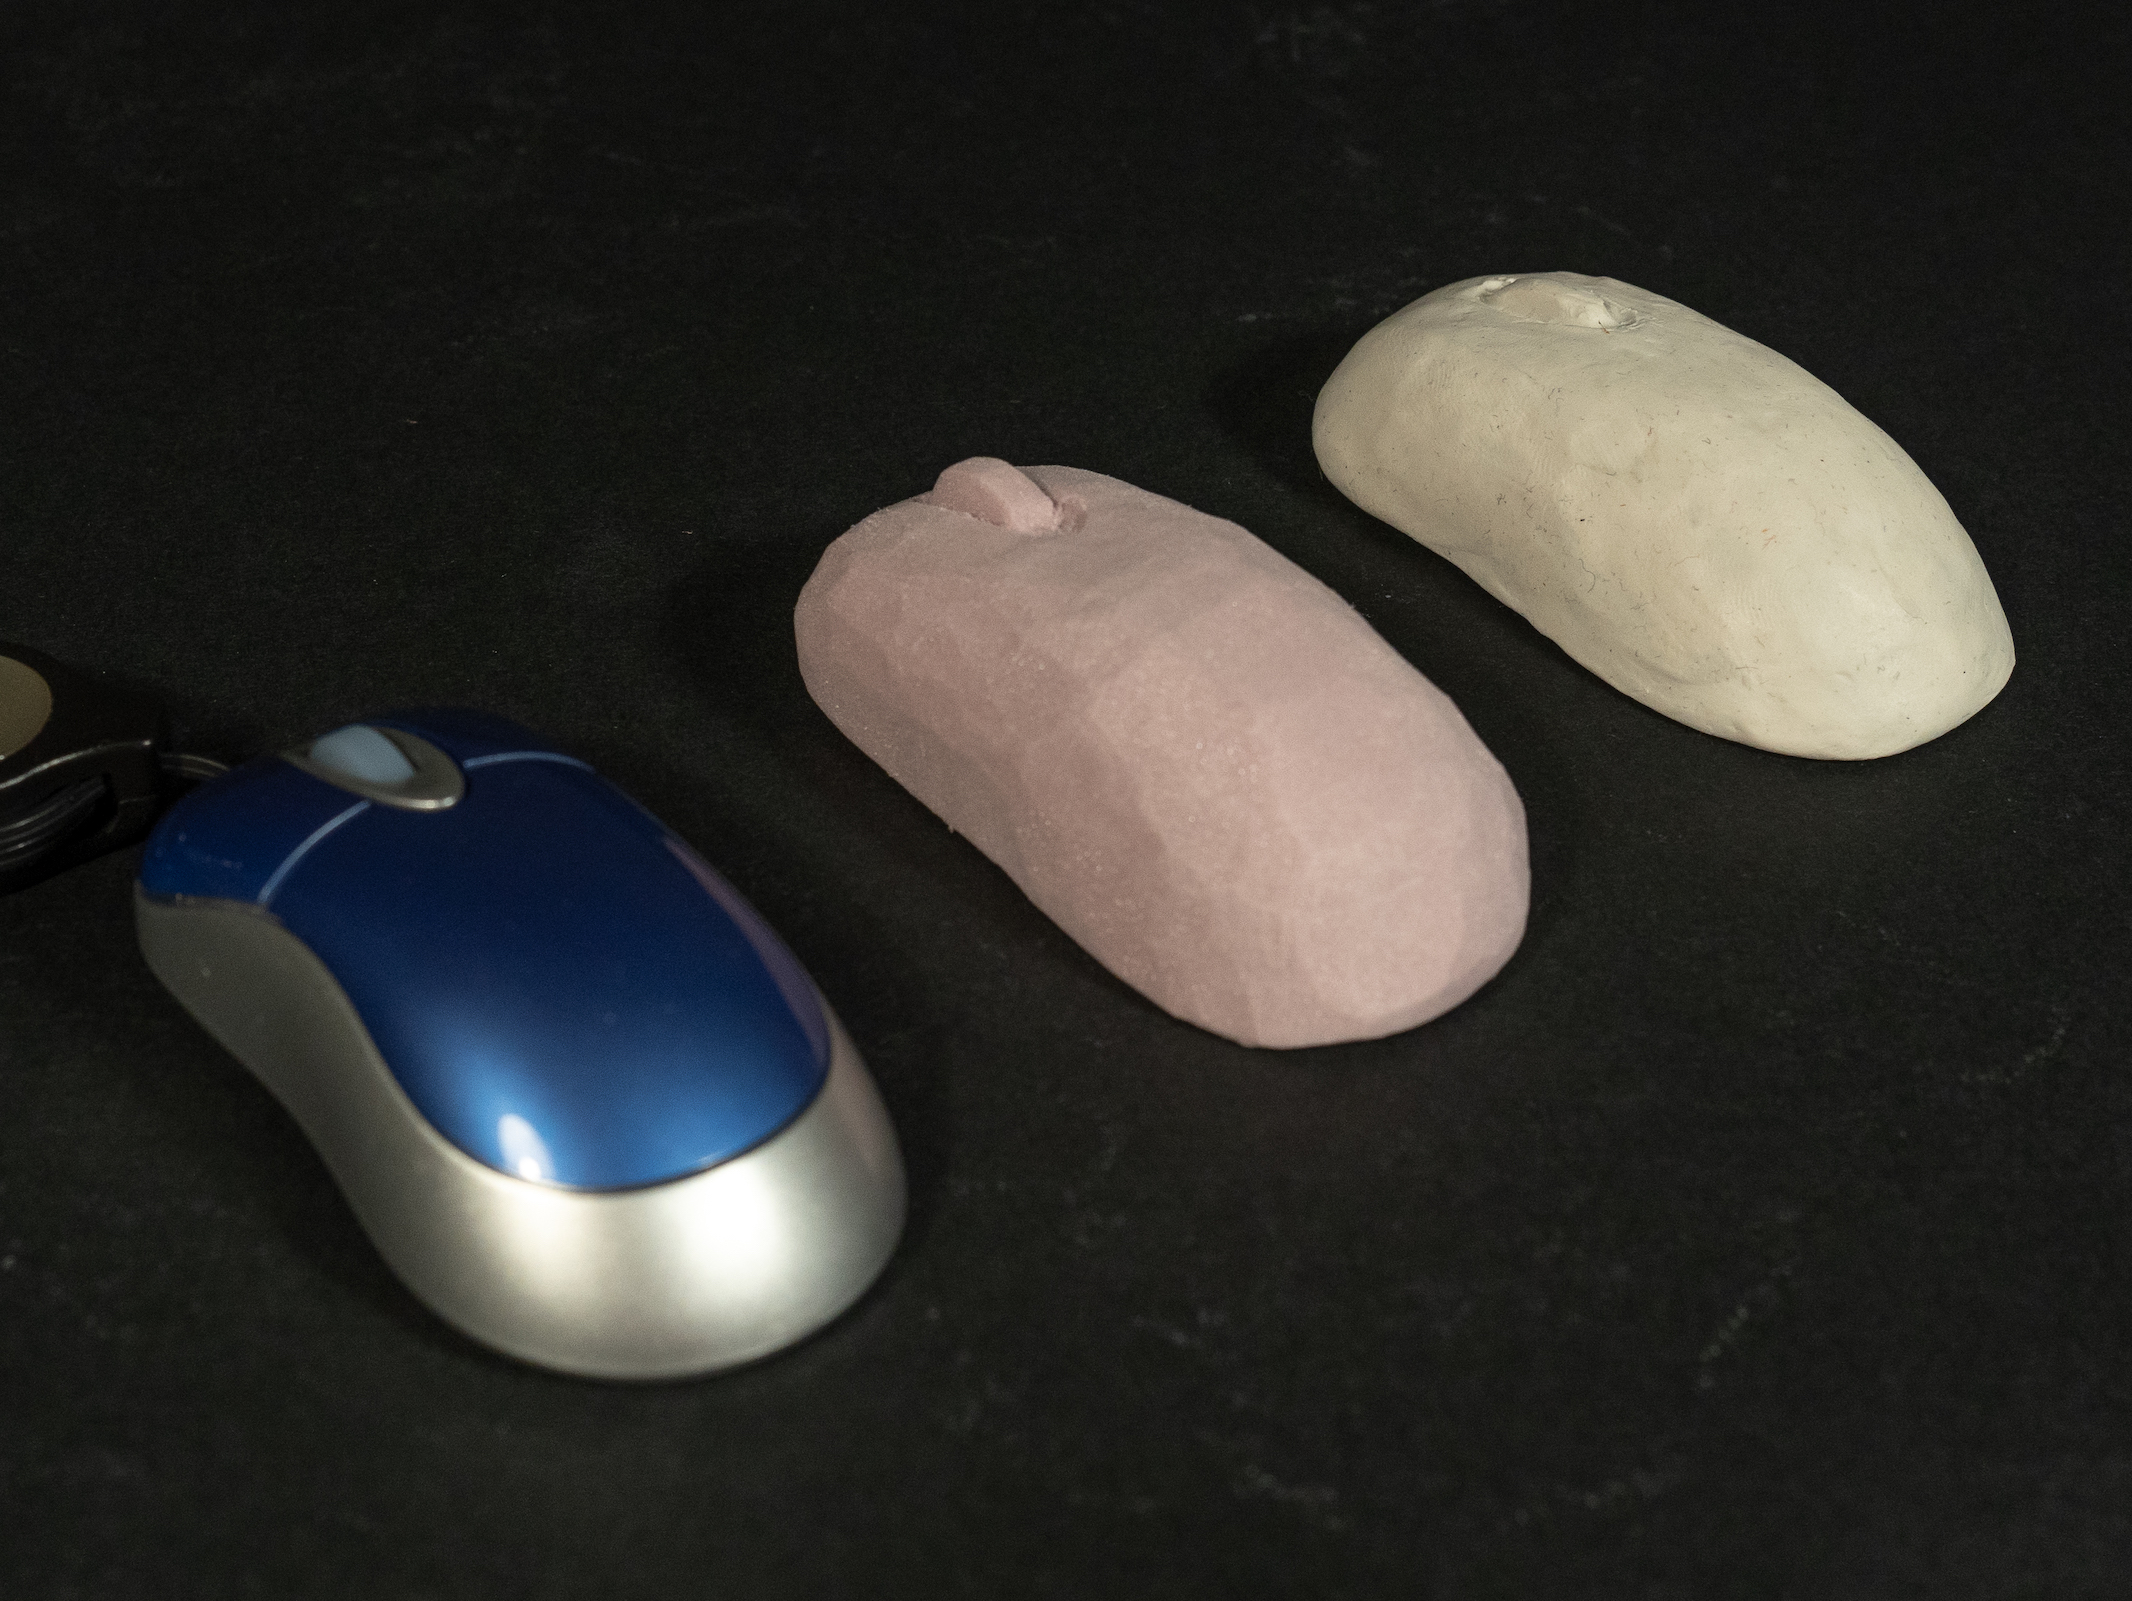 A computer mouse with one foam model and one clay model